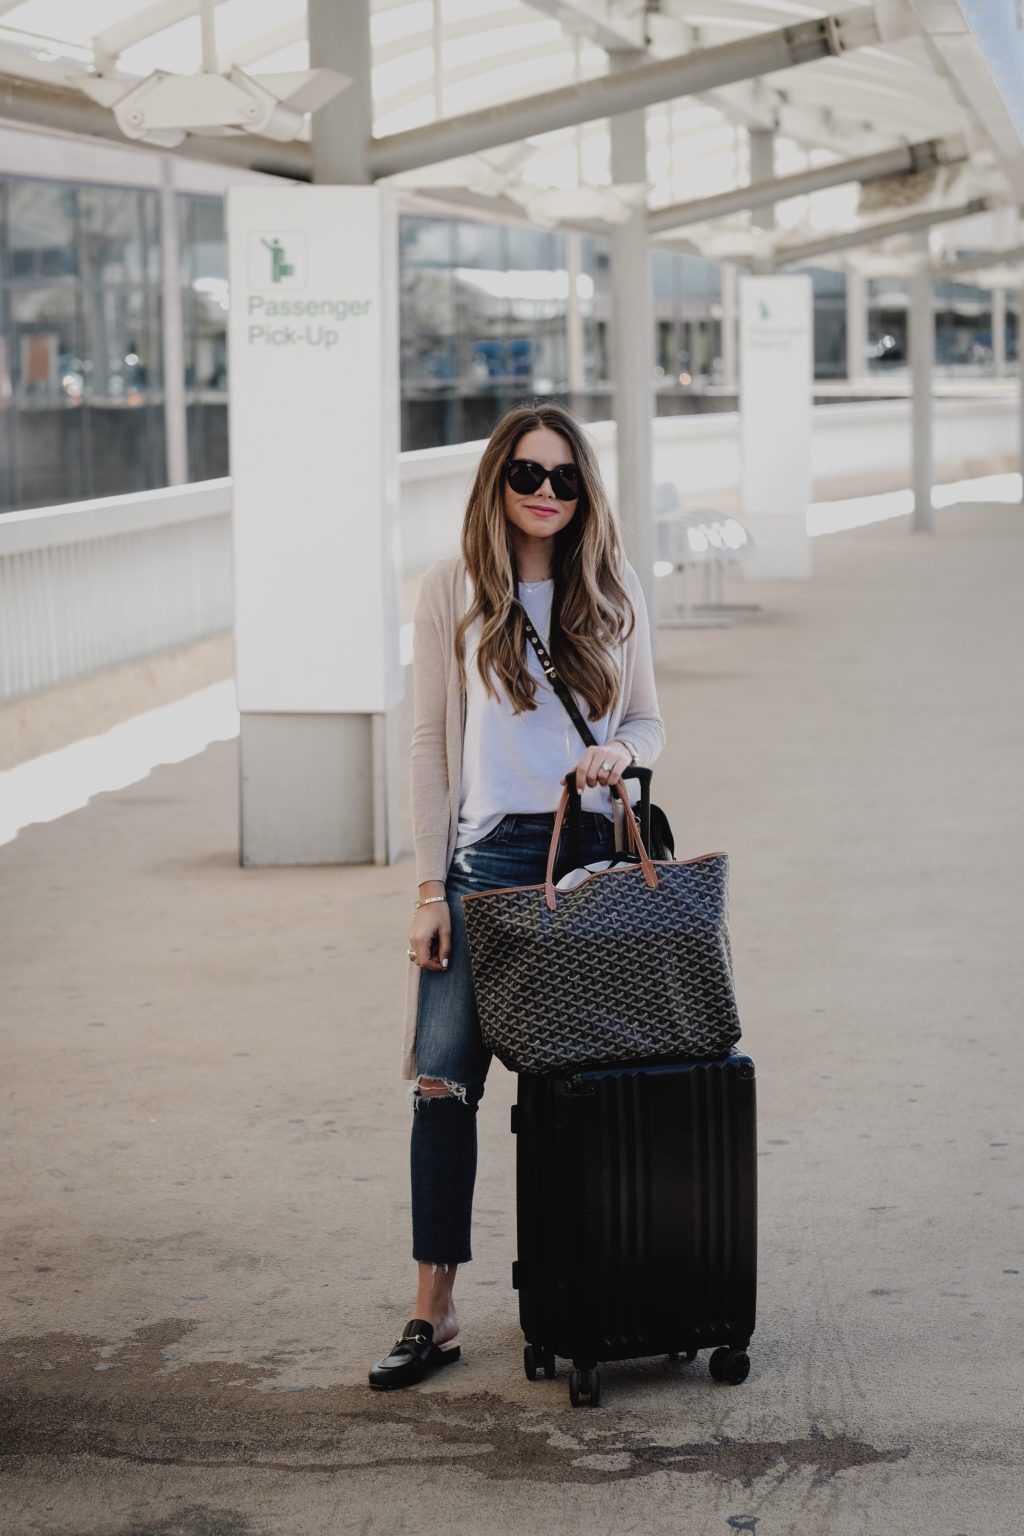 Comfortable Travel Outfit Ideas for Women, Style Yourself Chic